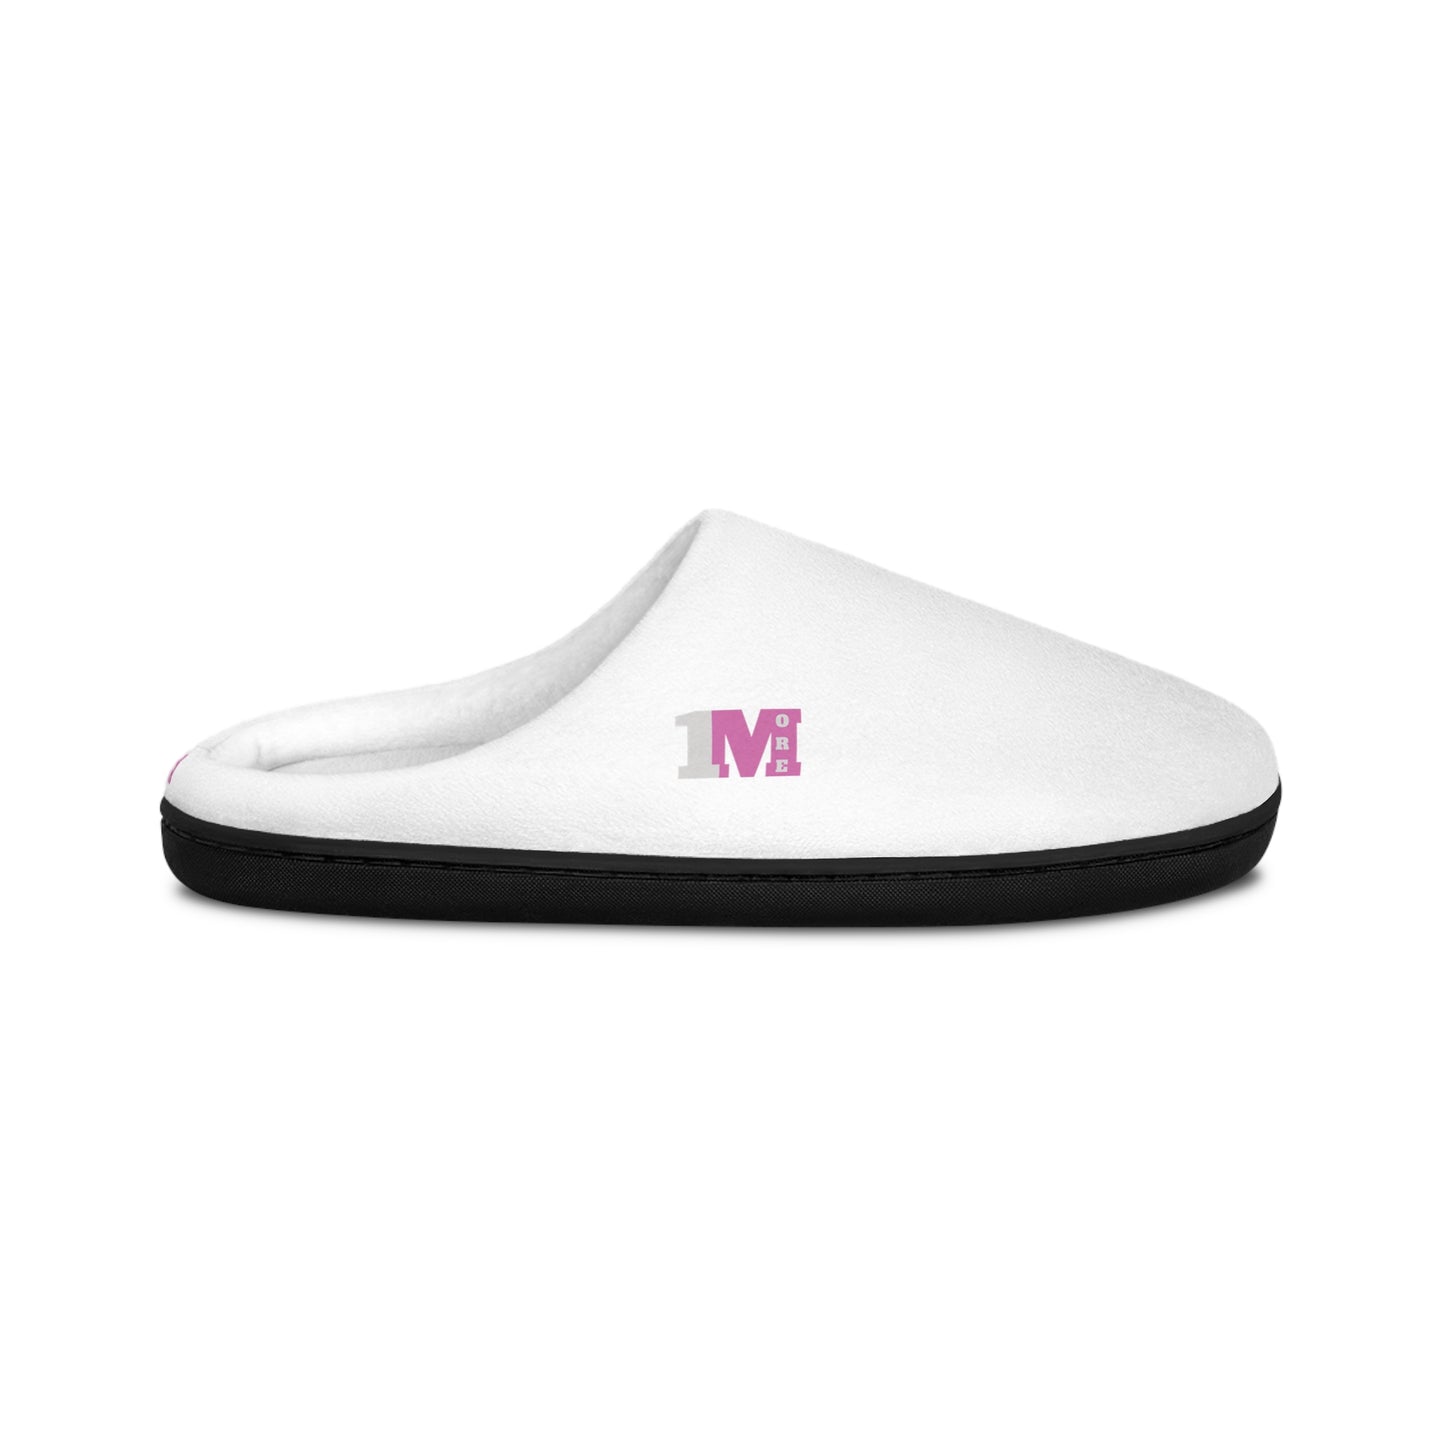 WOMEN'S WHITE 1M REST DAY HOUSE SHOES